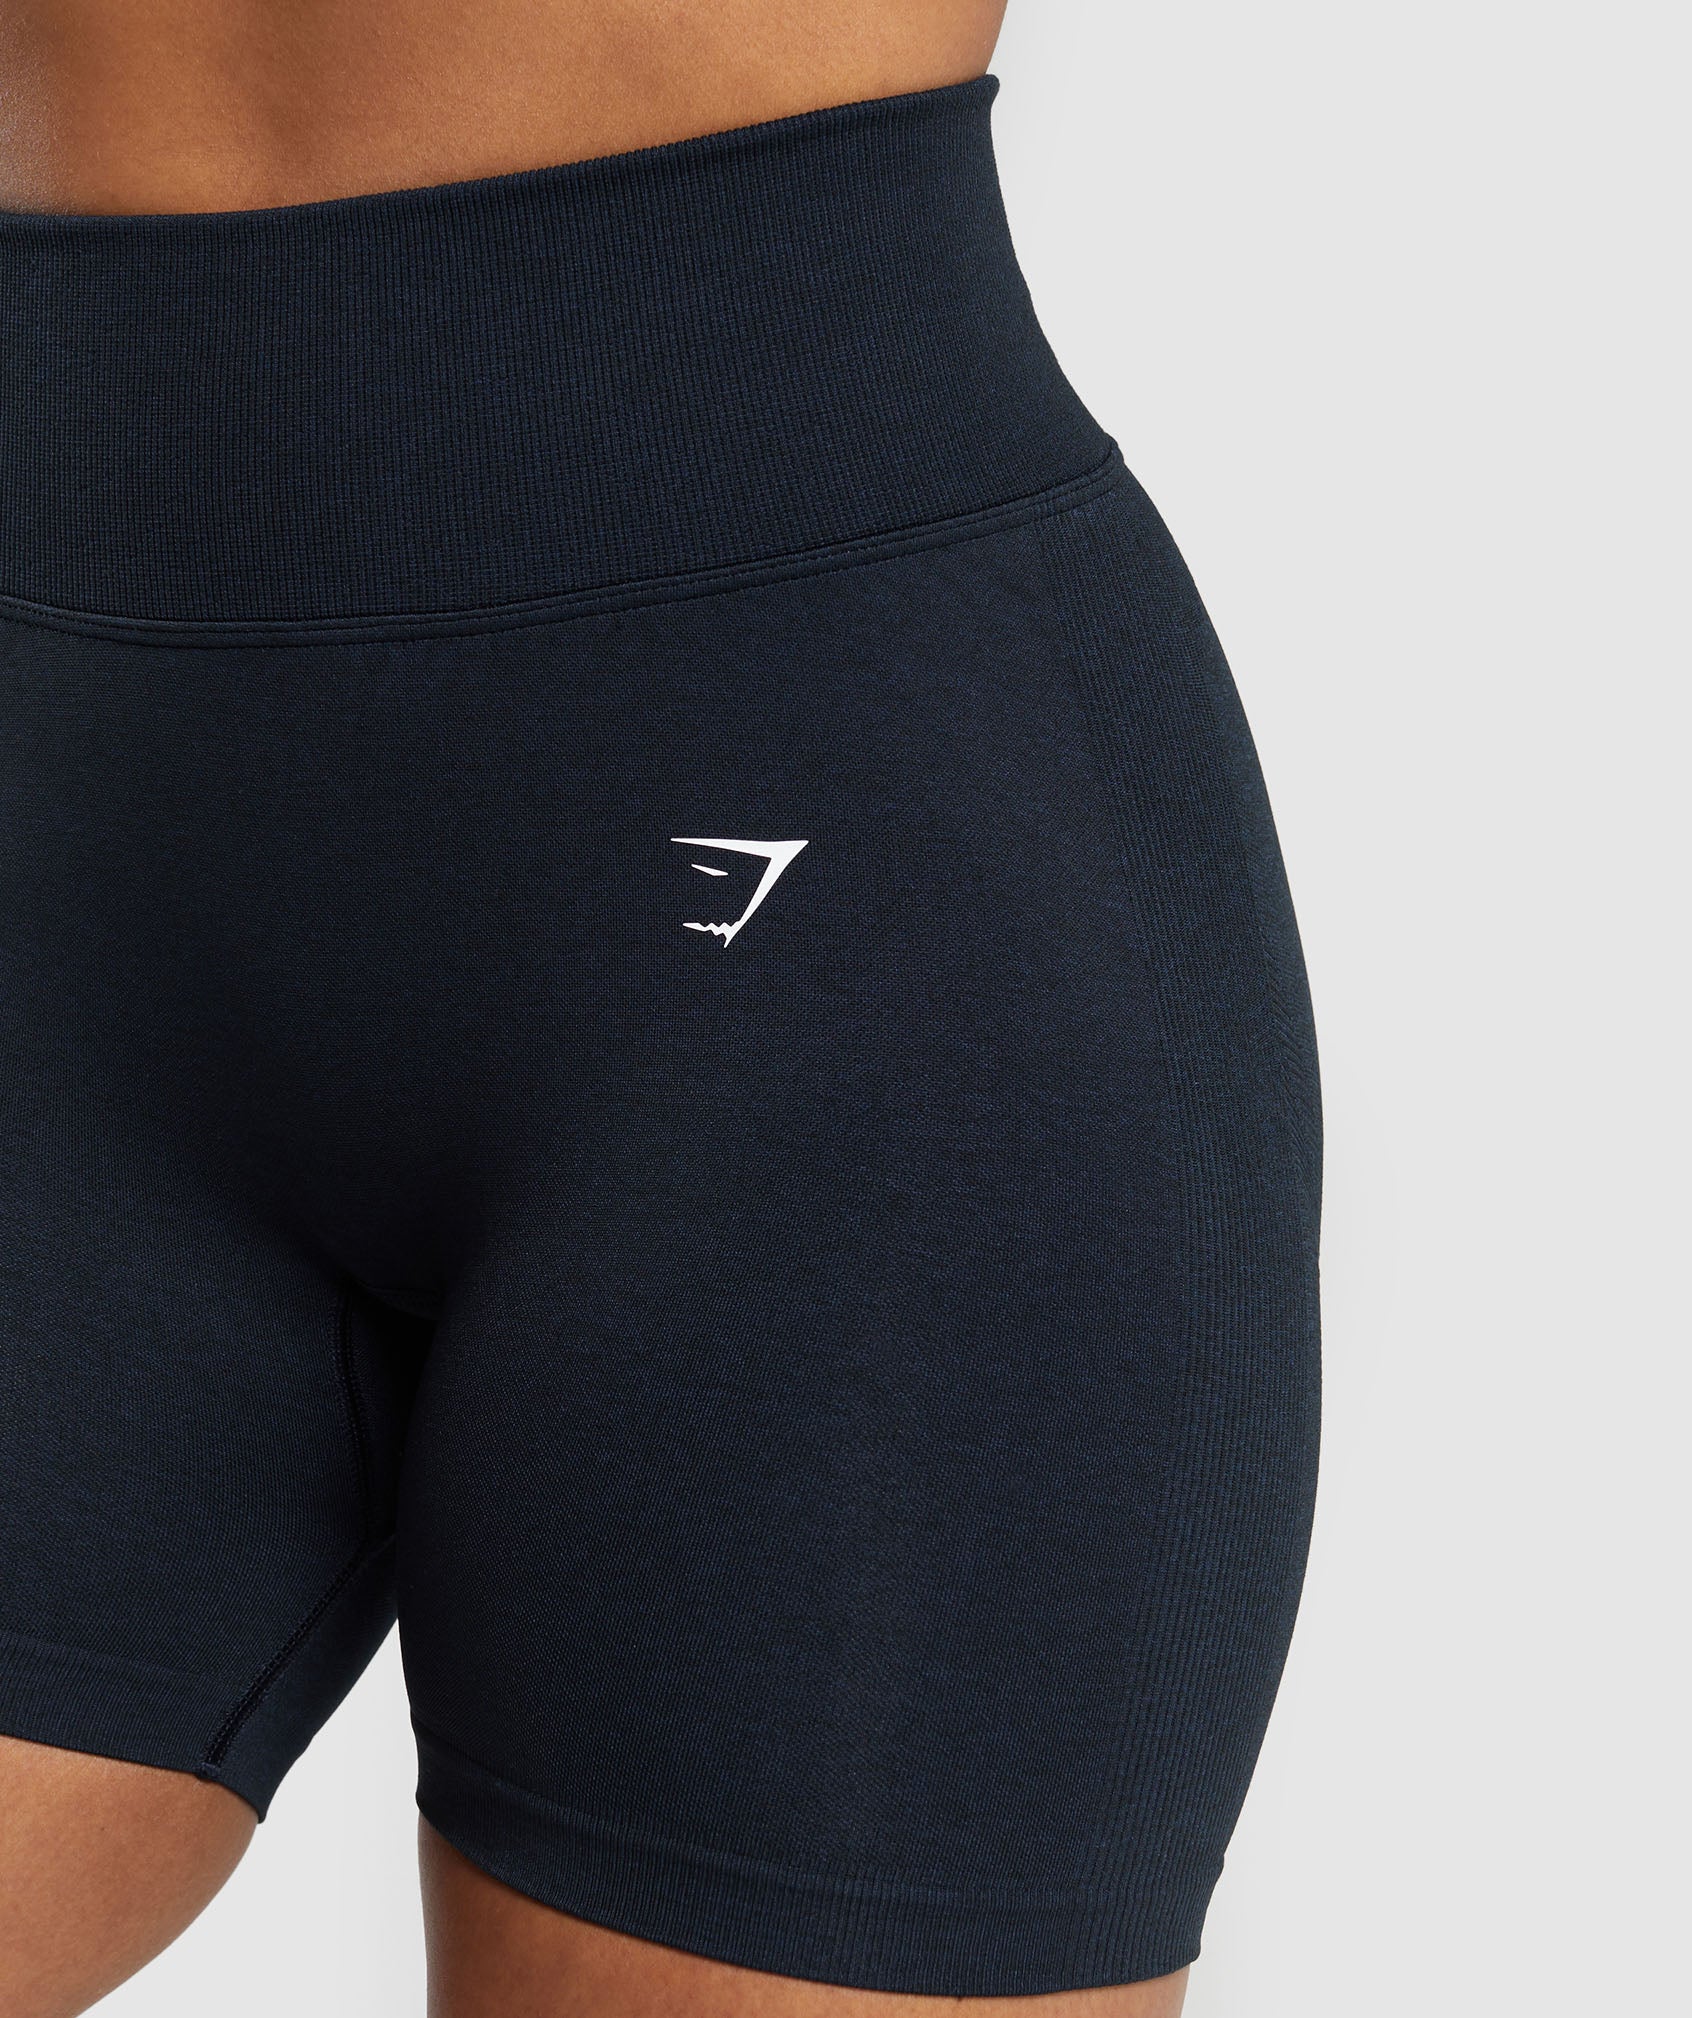 Lift Contour Seamless Shorts in Midnight Blue/Black Marl - view 5